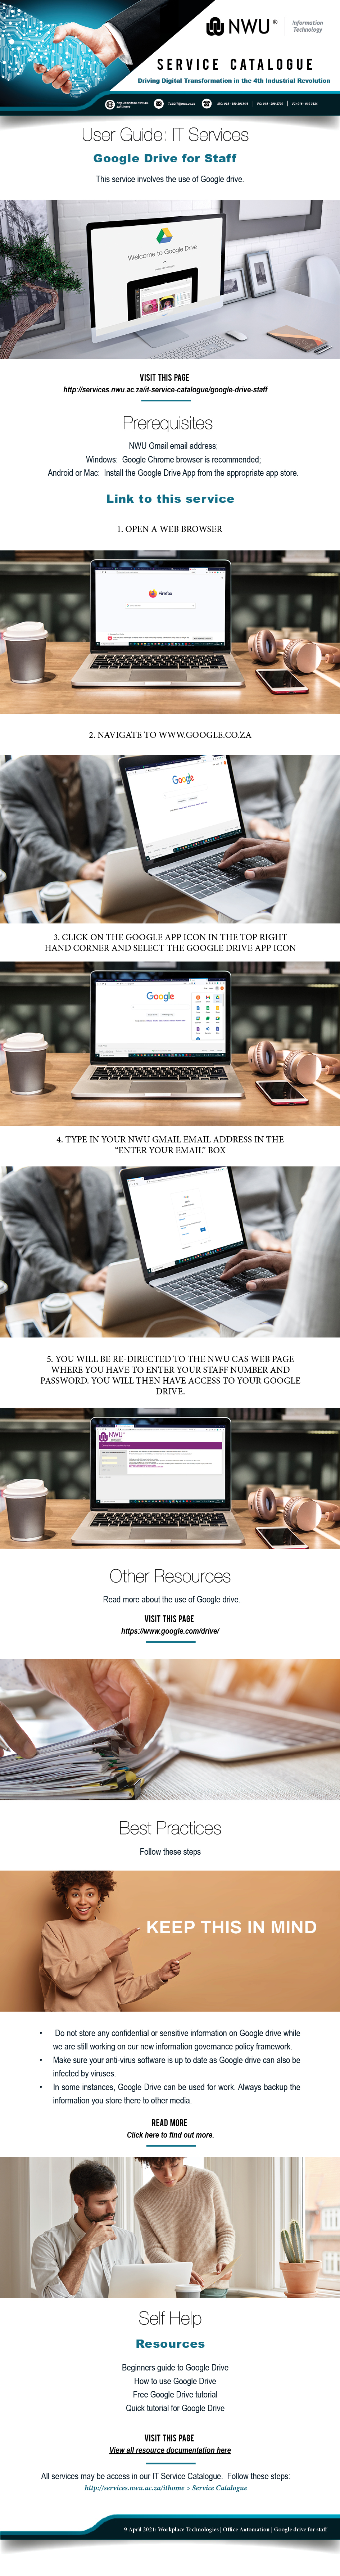 Infograhic informing how to sign up for google drive